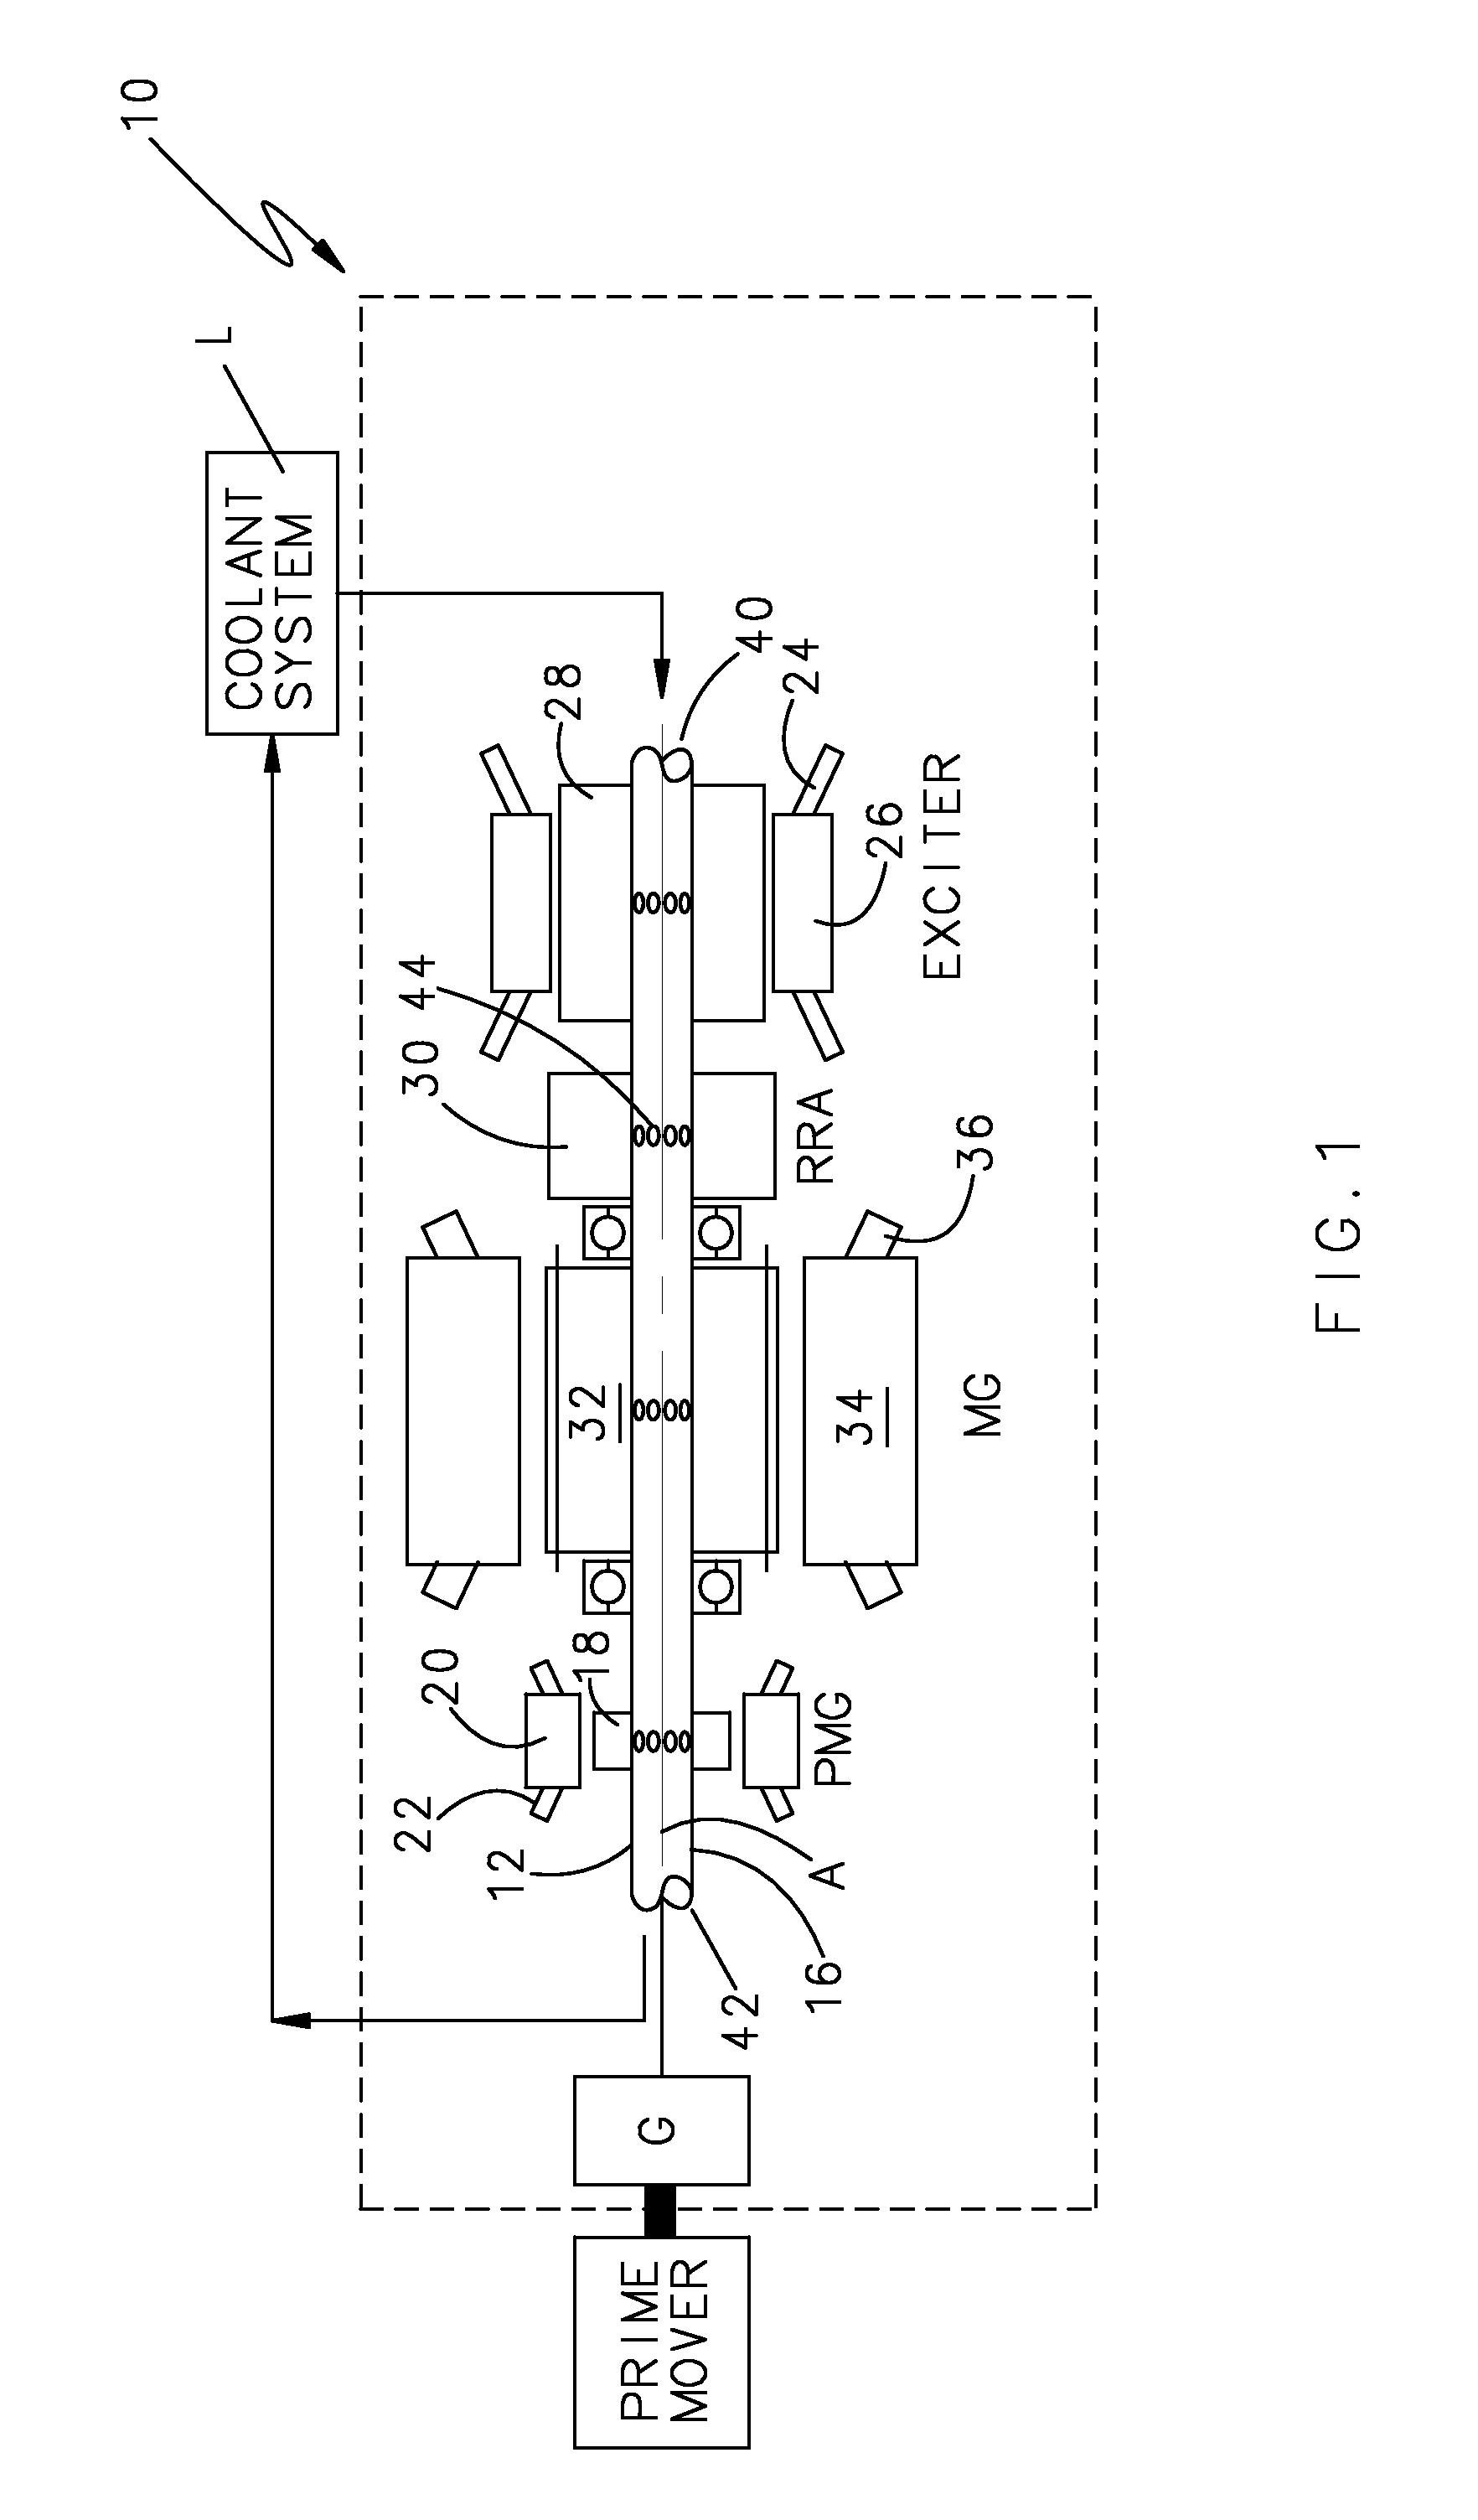 Rotor cooling system for synchronous machines with conductive sleeve